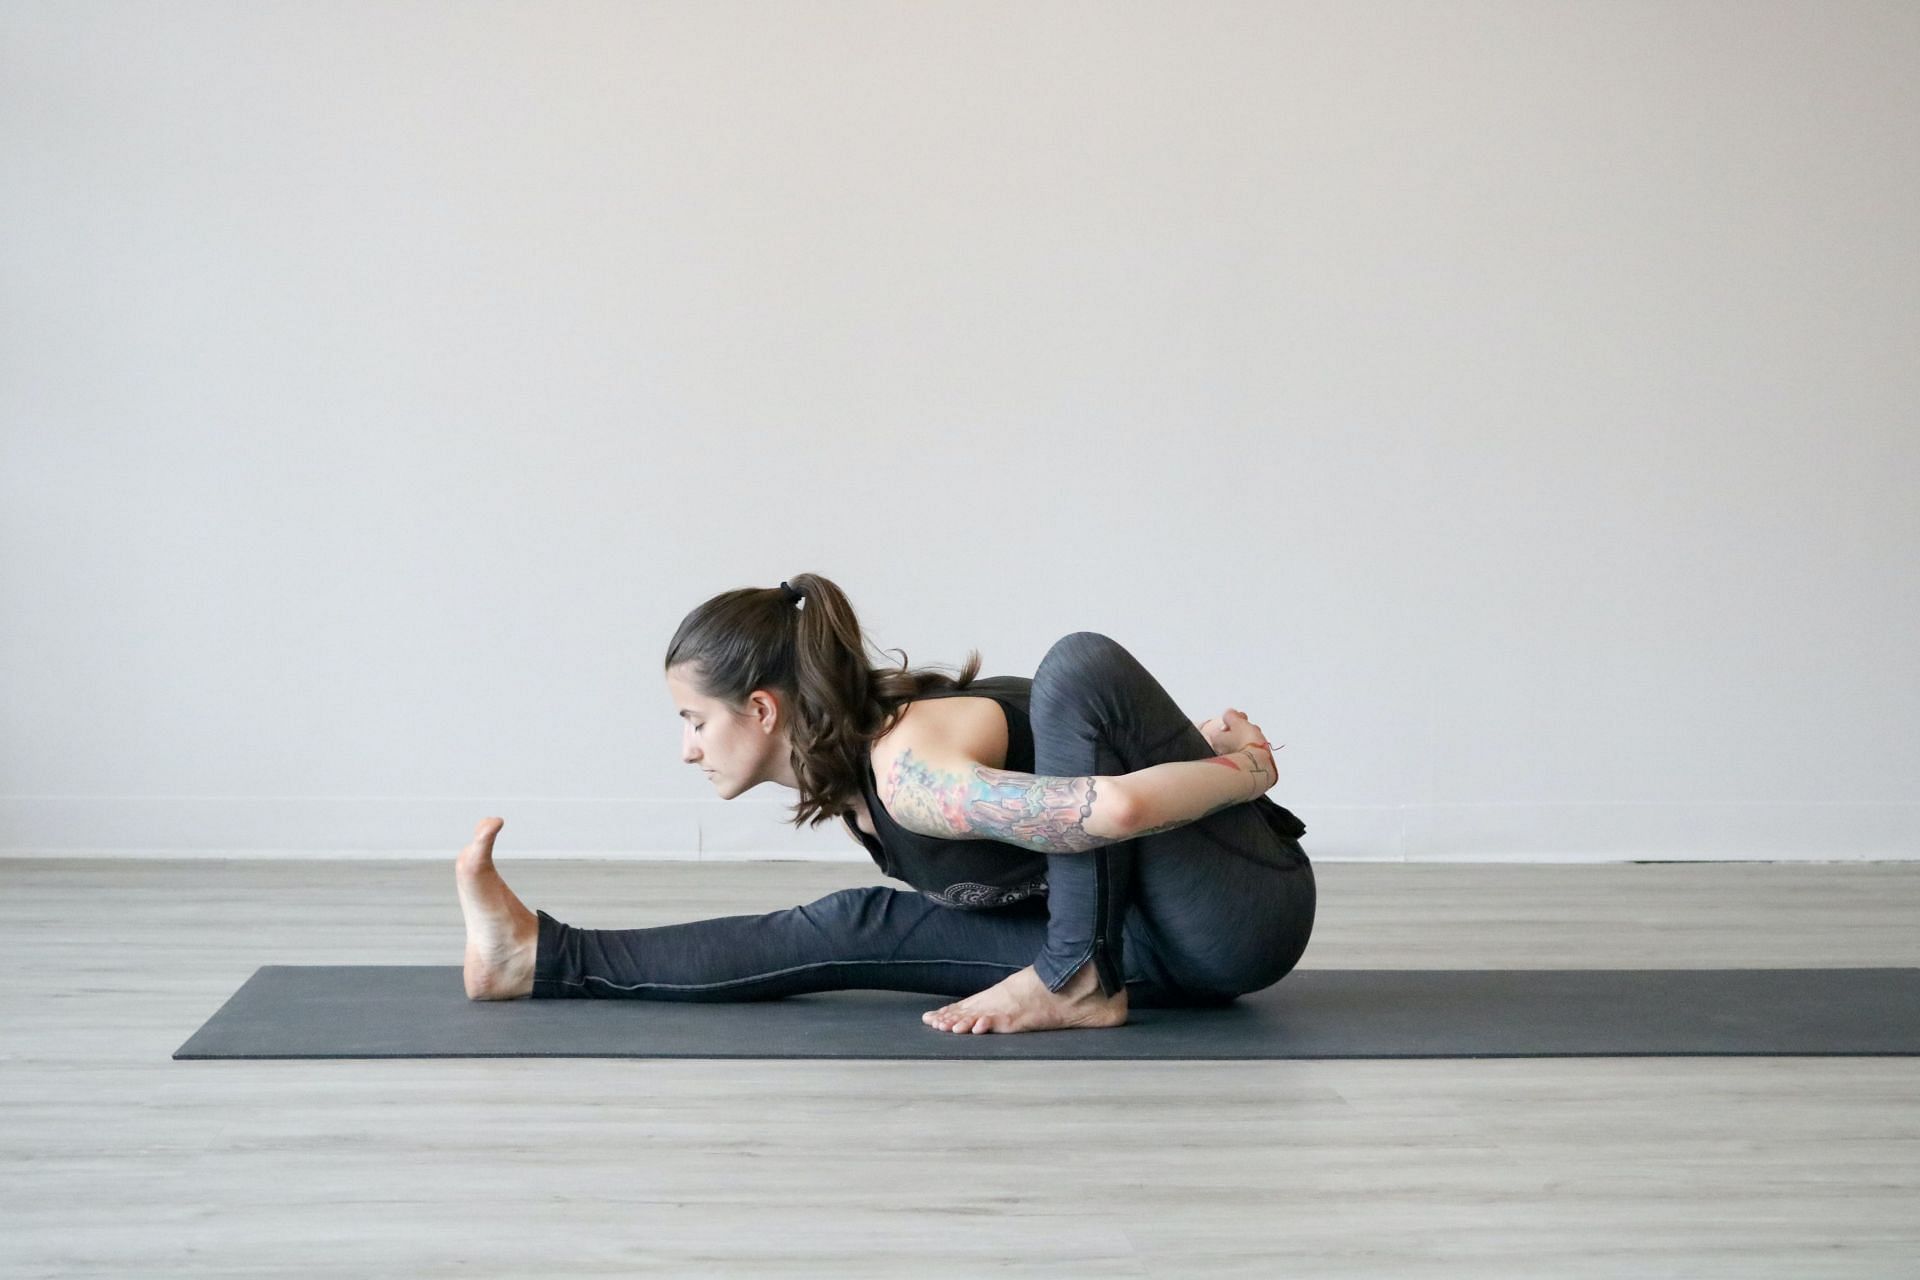 Yoga poses for improving flexibility and mobility